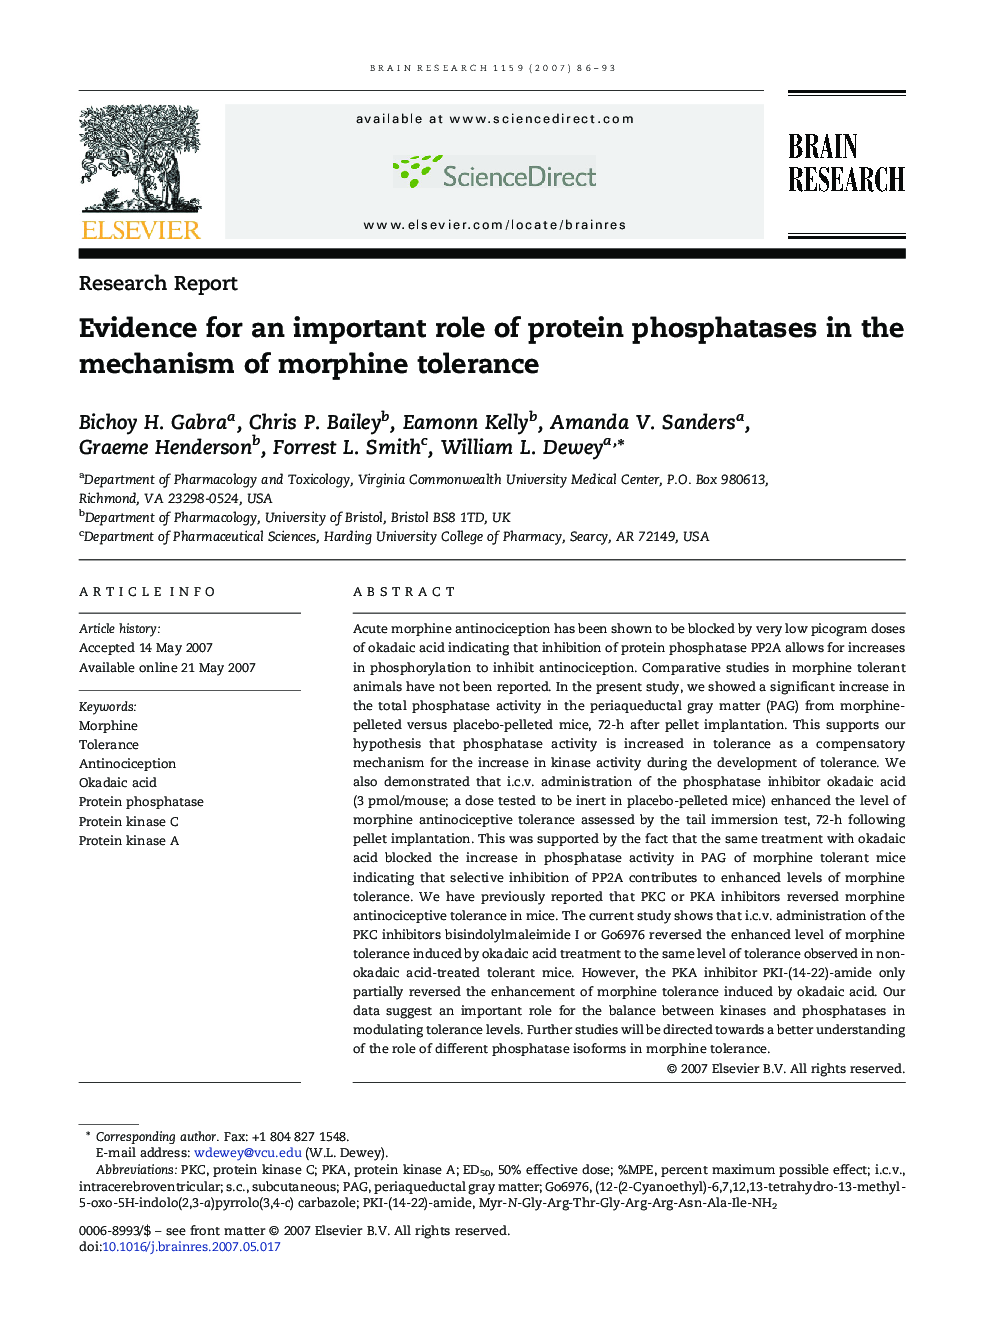 Evidence for an important role of protein phosphatases in the mechanism of morphine tolerance